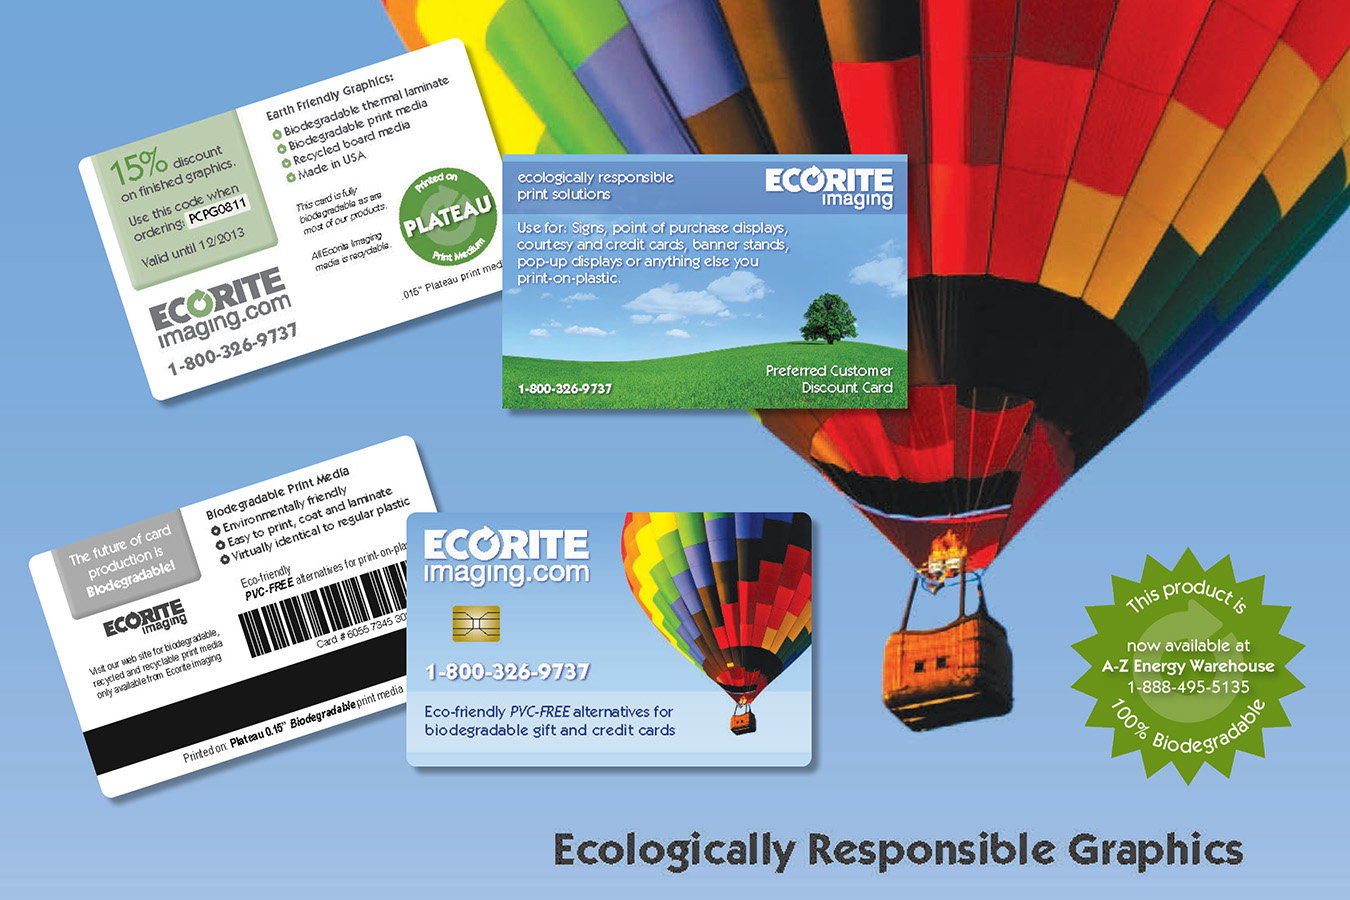 ecorite 7 : Biodegradable credit card and discount cards made from Steppe and Plateau biodegradable Plastic